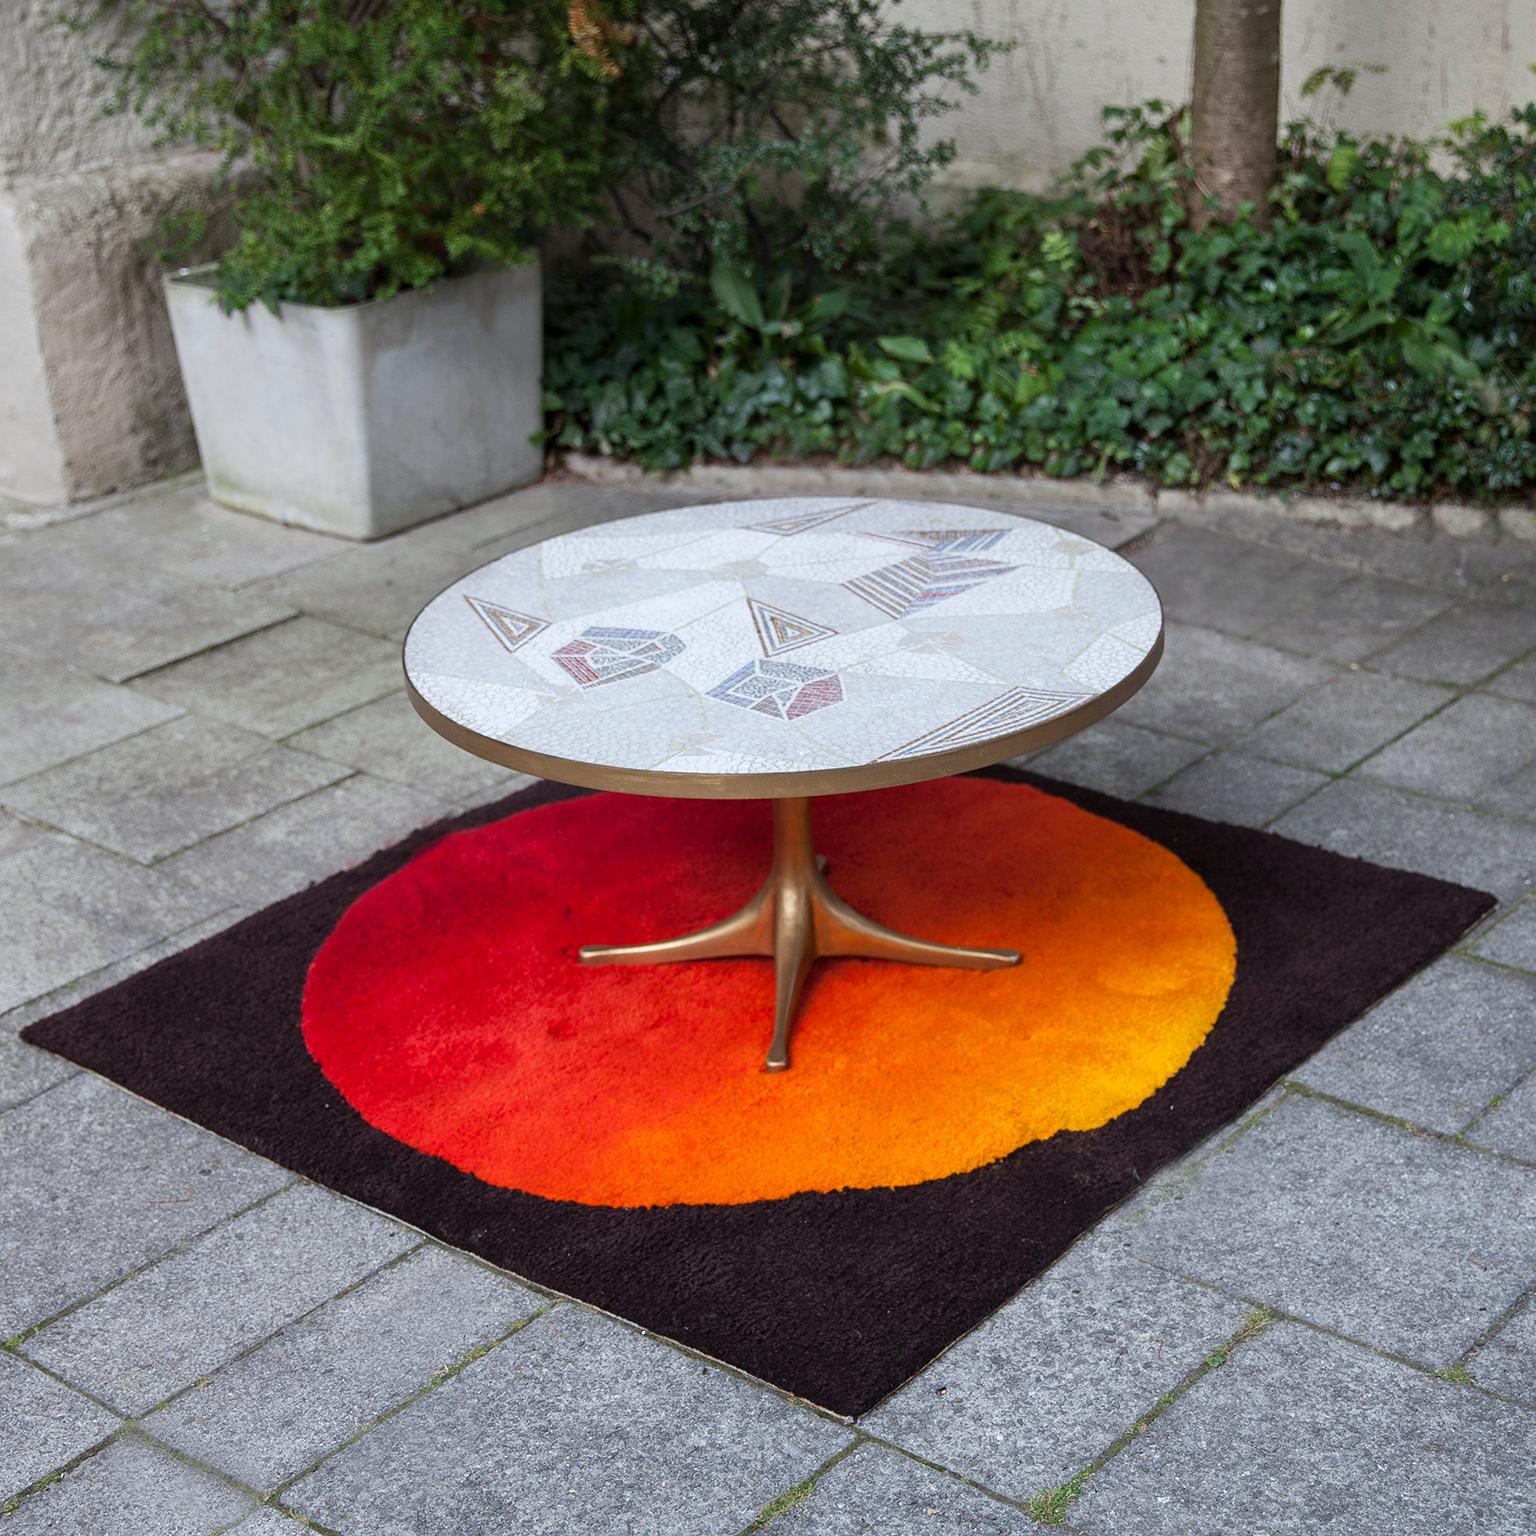 Mosaic coffee table by the German sculptor Berthold Muller, Oerlinghausen (1893-1979).
The table has a round tabletop and beautiful mosaic pattern of glass mosaic tiles and a brass rim on a four star gold painted base. The color of the mosaic tiles